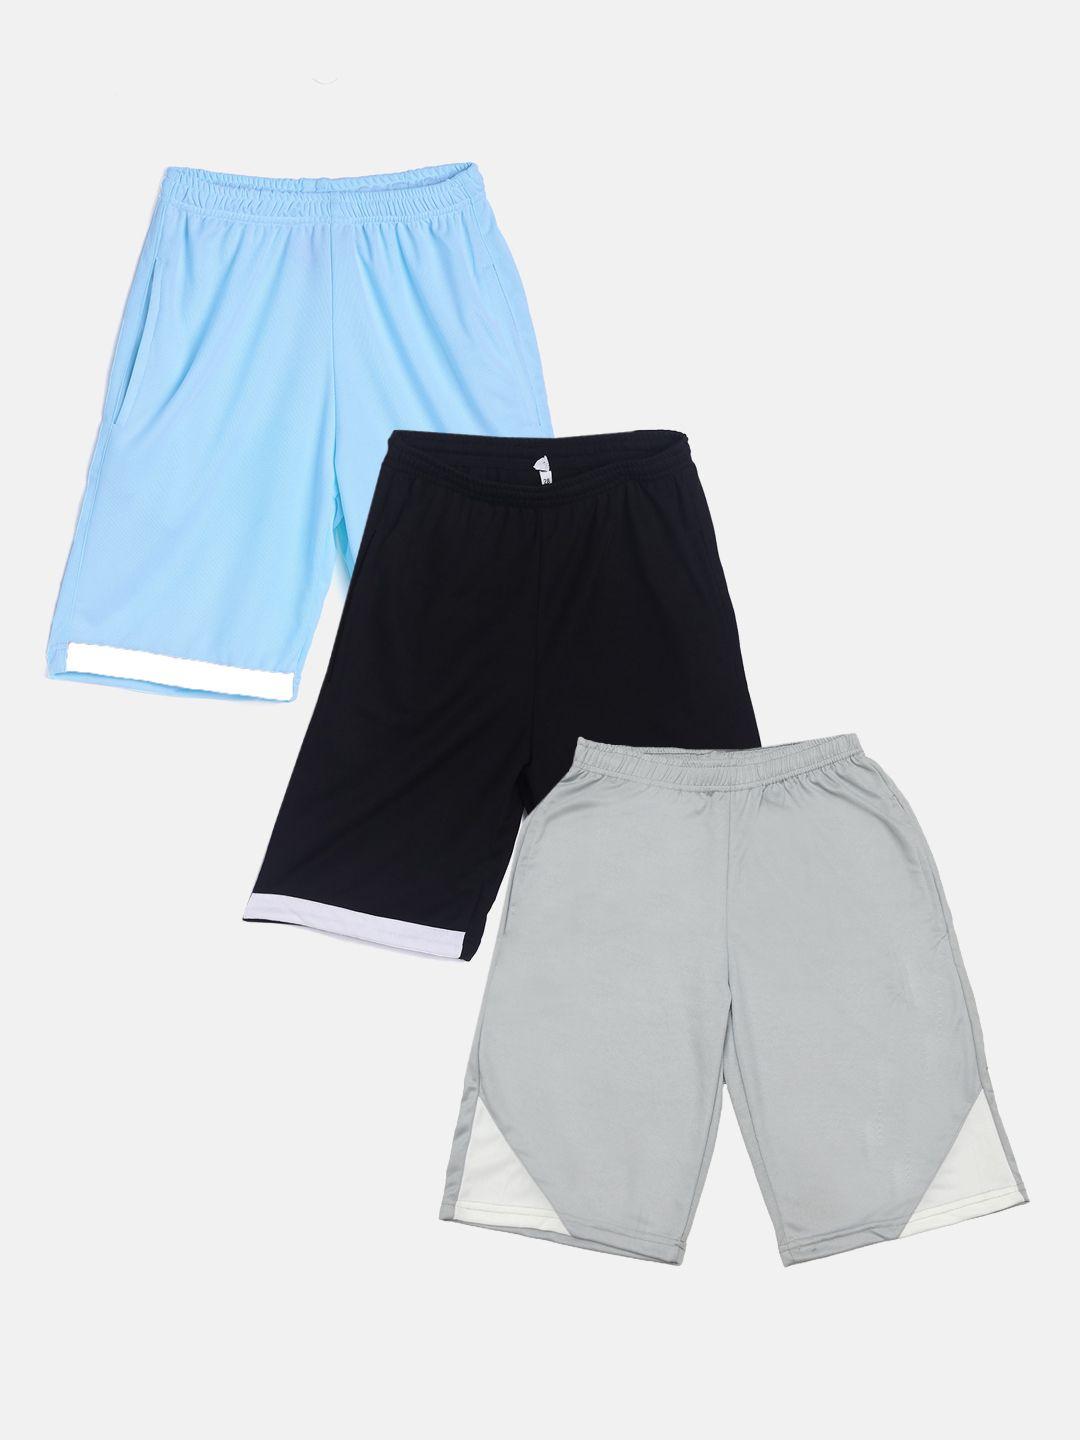 tiny hug boys pack of 3 high-rise rapid-dry outdoor sports shorts